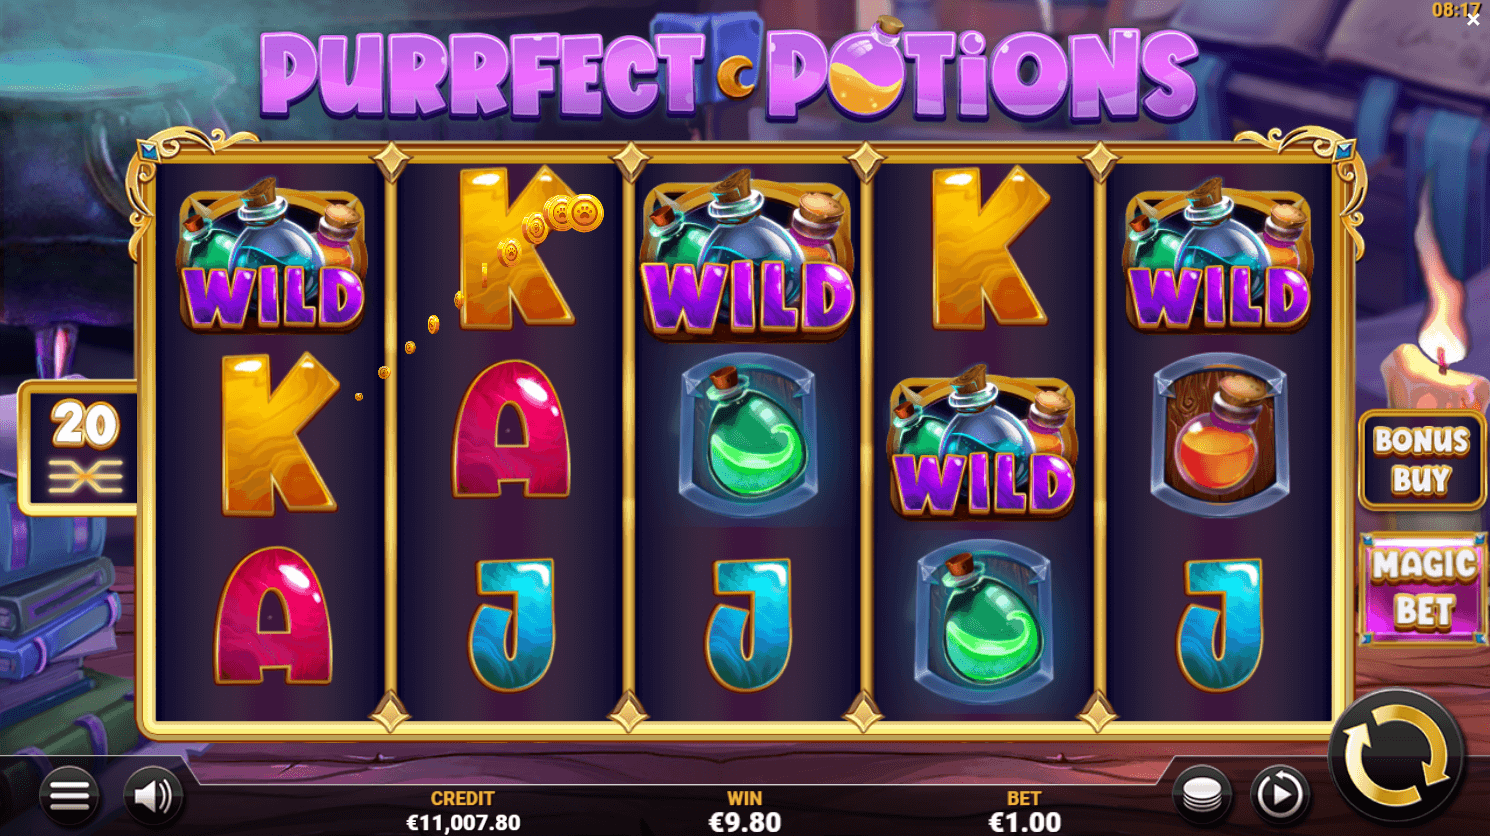 Purrfect Potions Slots Game by Yggdrasil